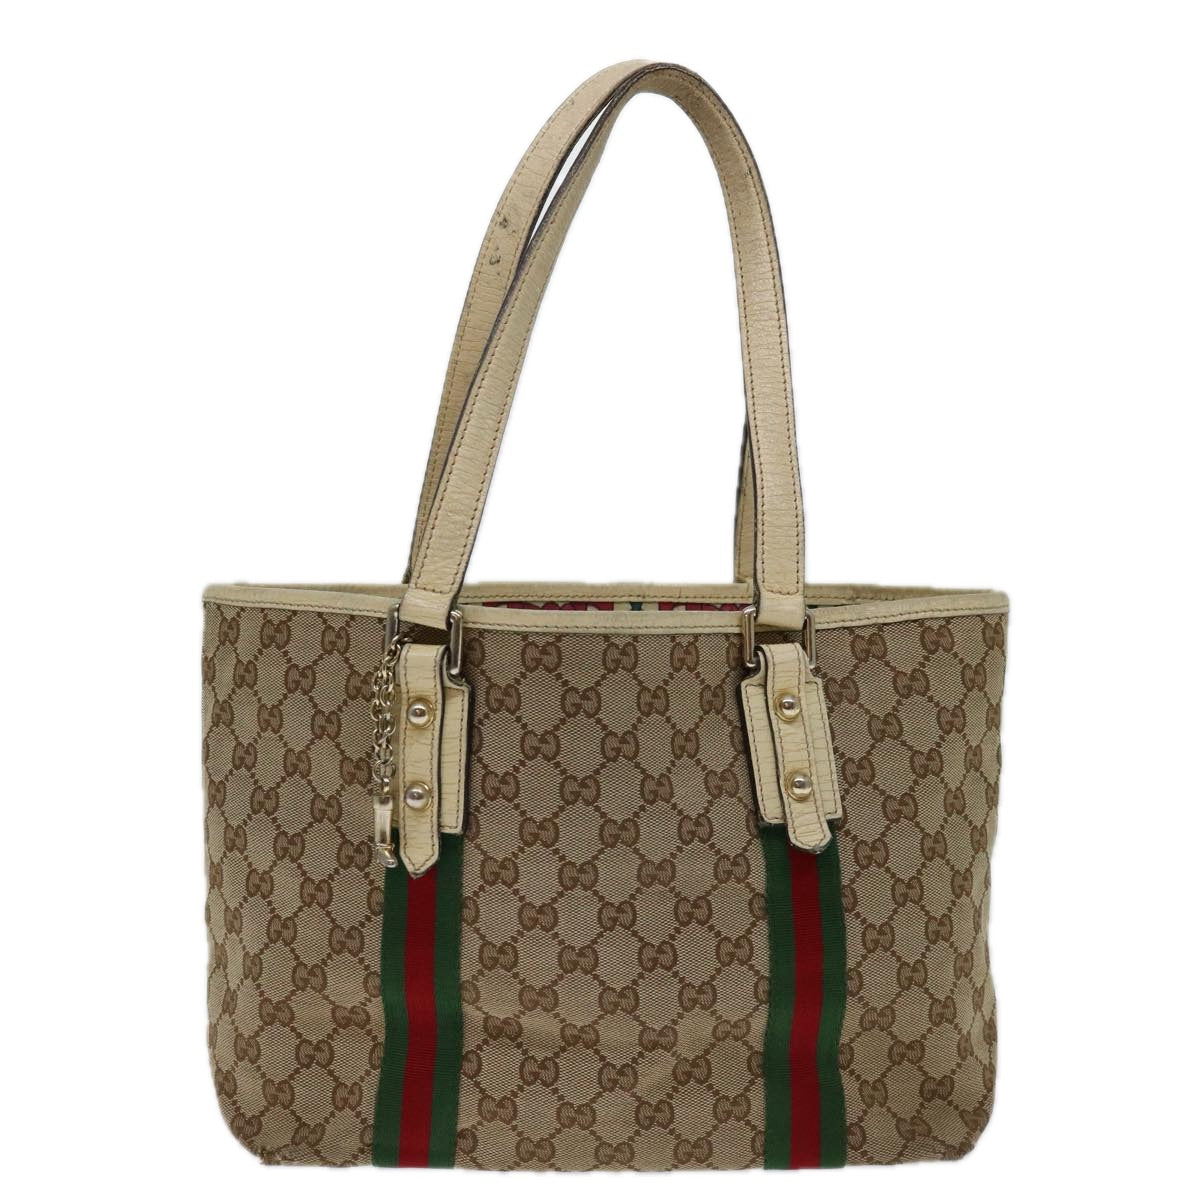 GUCCI GG Canvas Web Sherry Line Tote Bag Beige Red Green 137396 Auth 69642 - 0